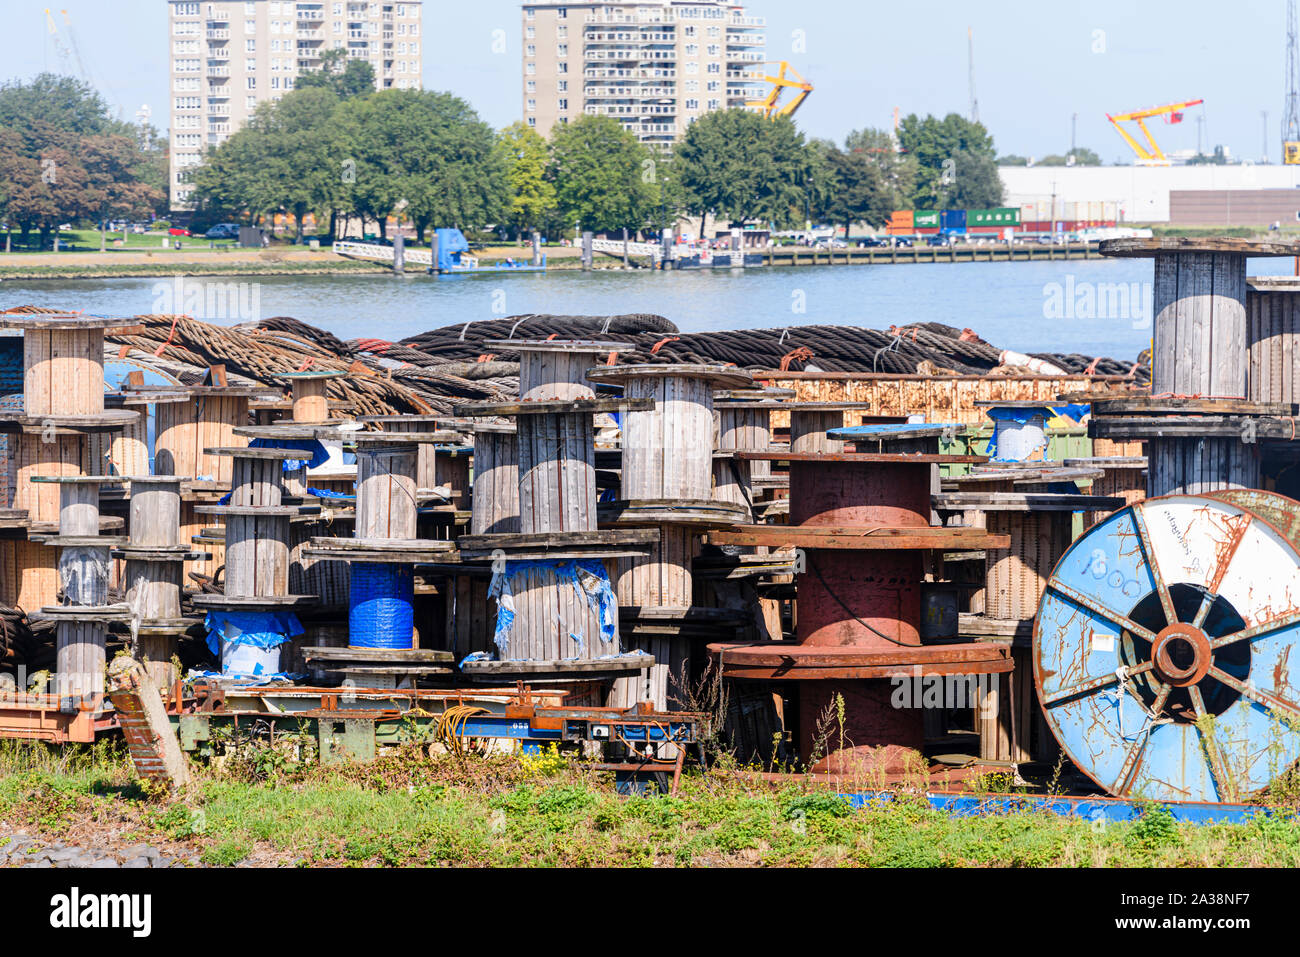 Empty wooden spools, used for transporting large electricity and telecommunications cables, lie at Rotterdam Harbour, Rotterdam, Netherlands Stock Photo